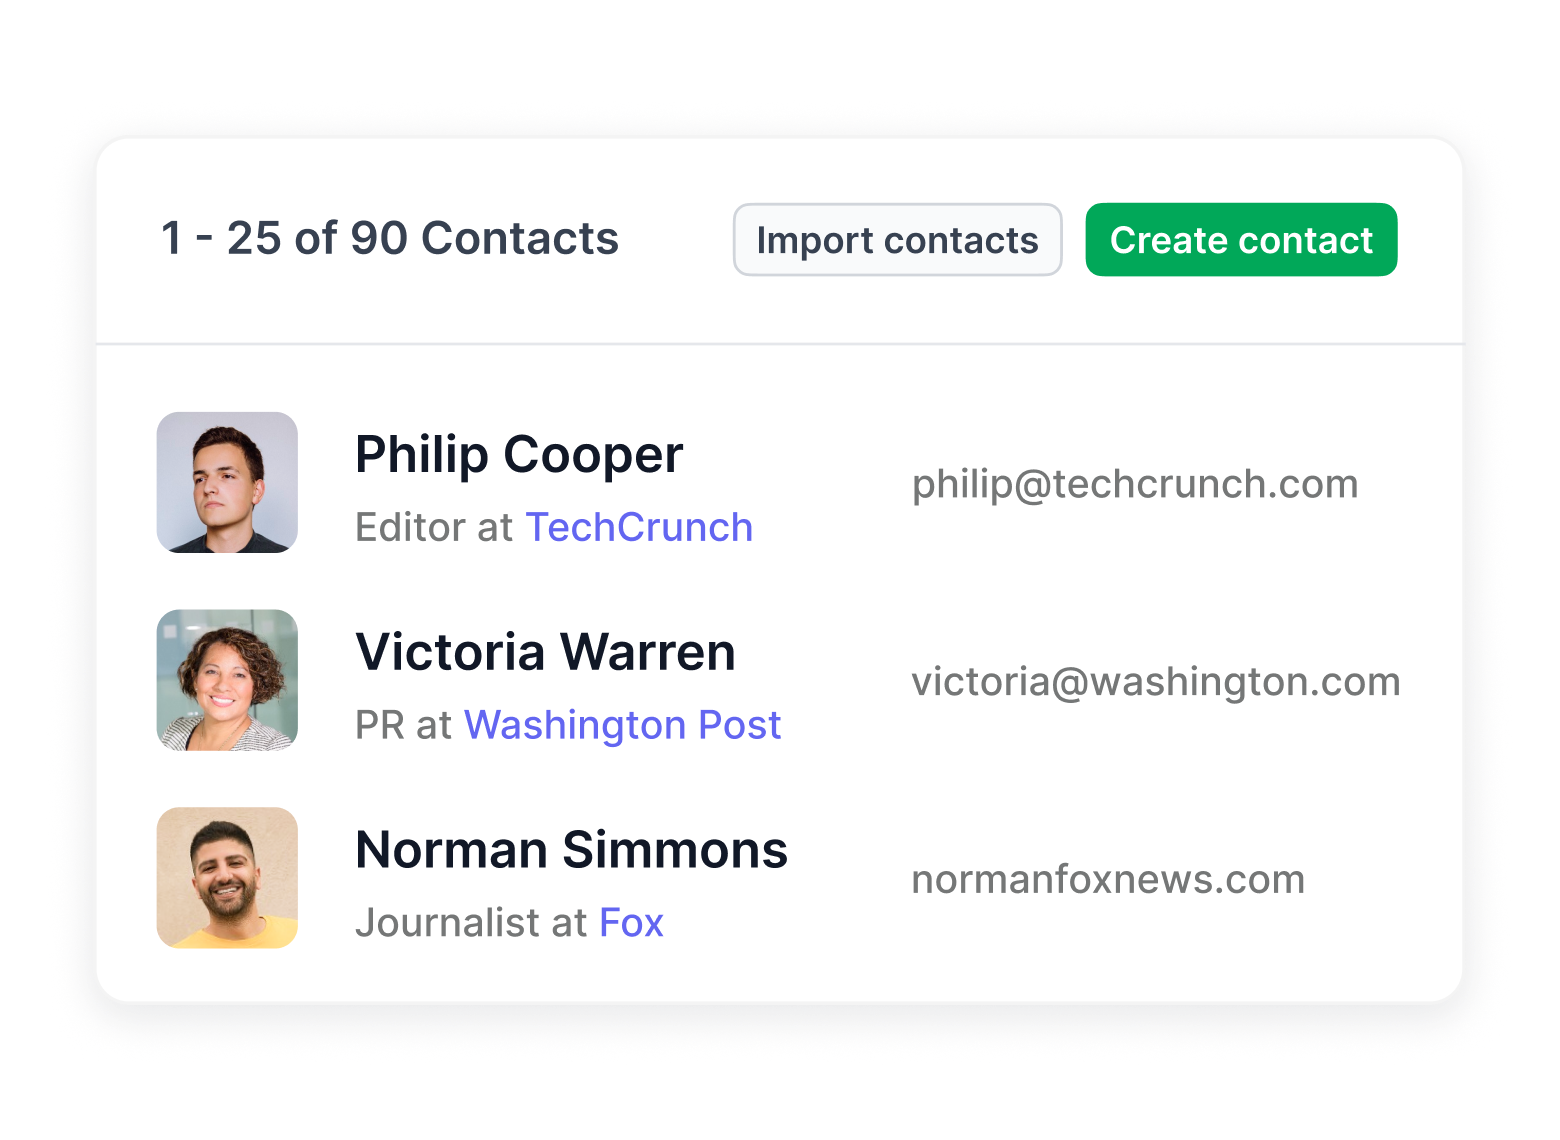 Manage all your contact lists as a team